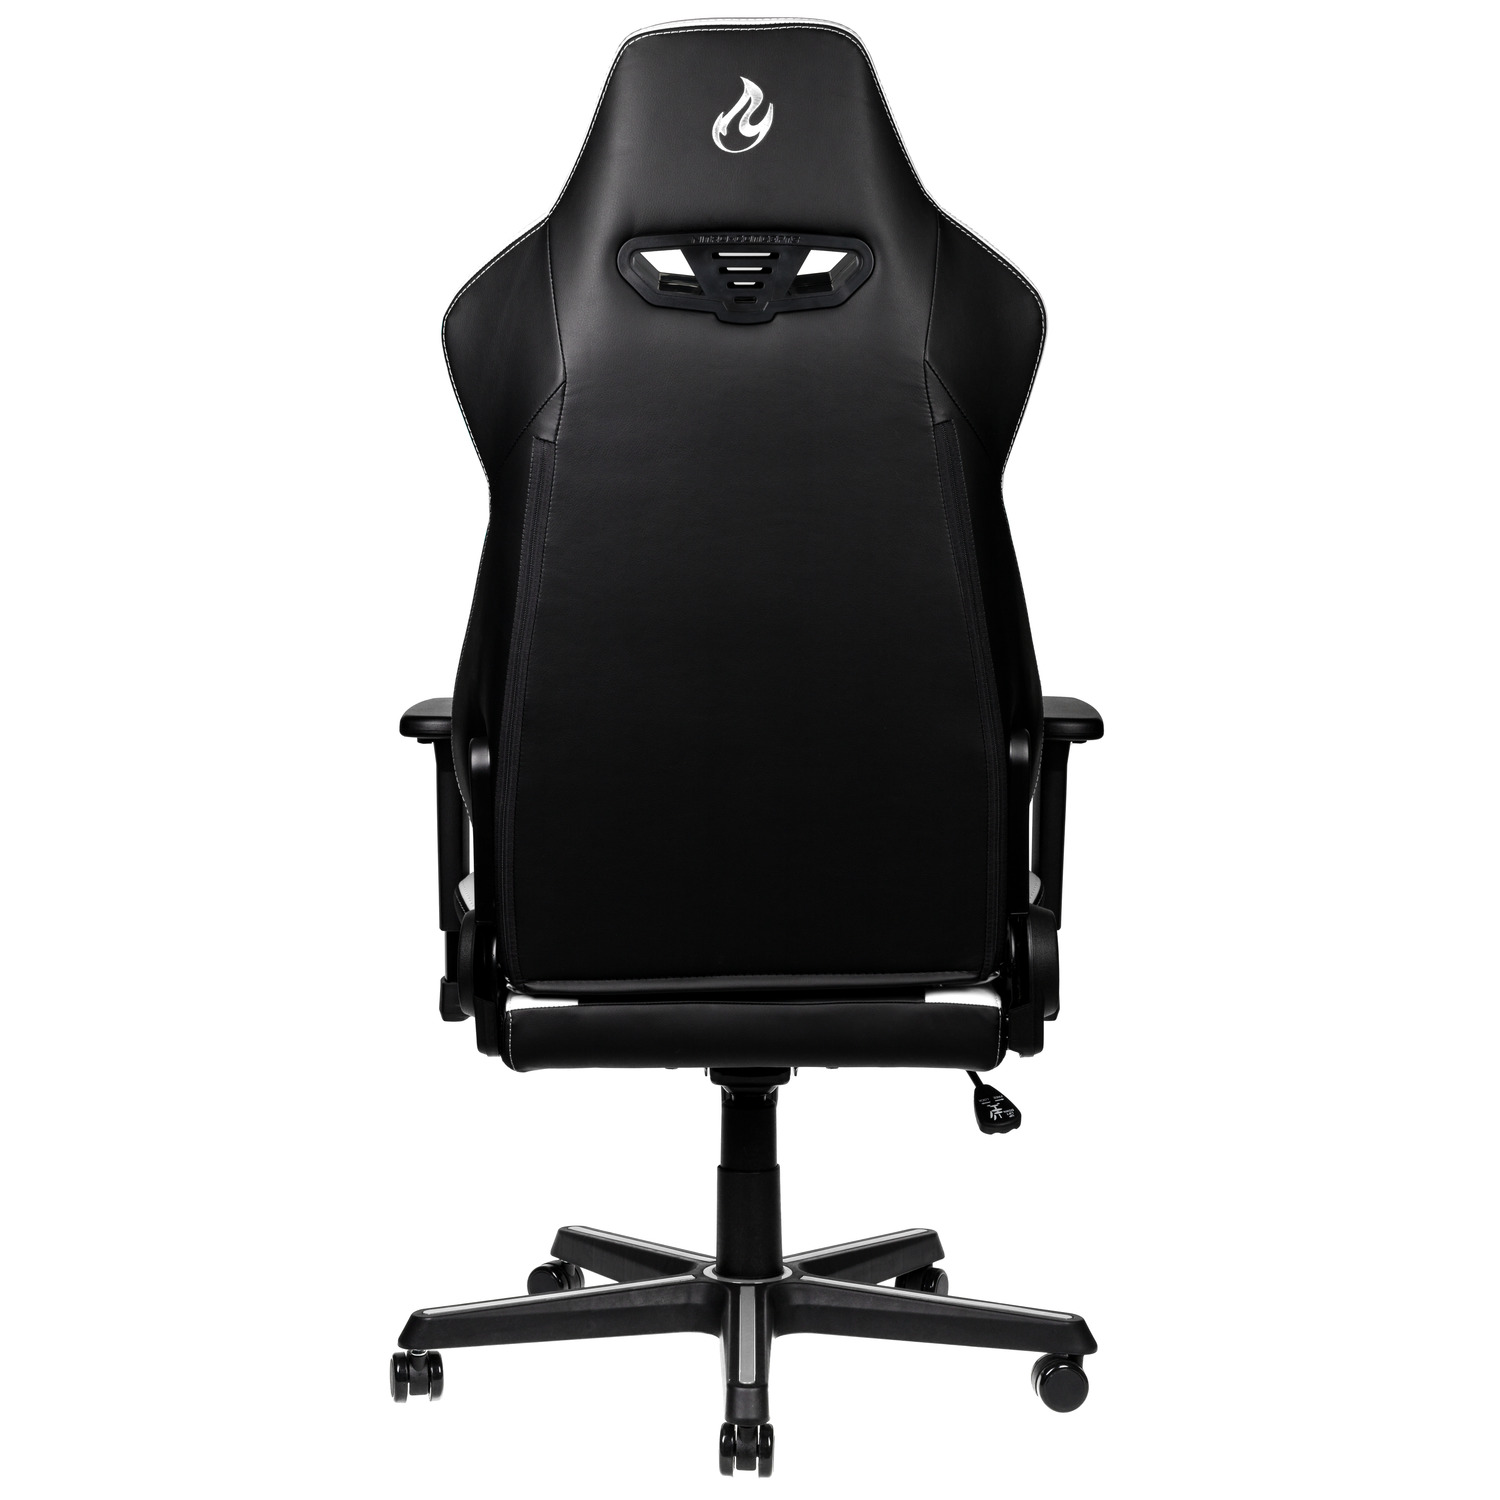 nitro-concepts - S300 EX Gaming Chair Radiant White